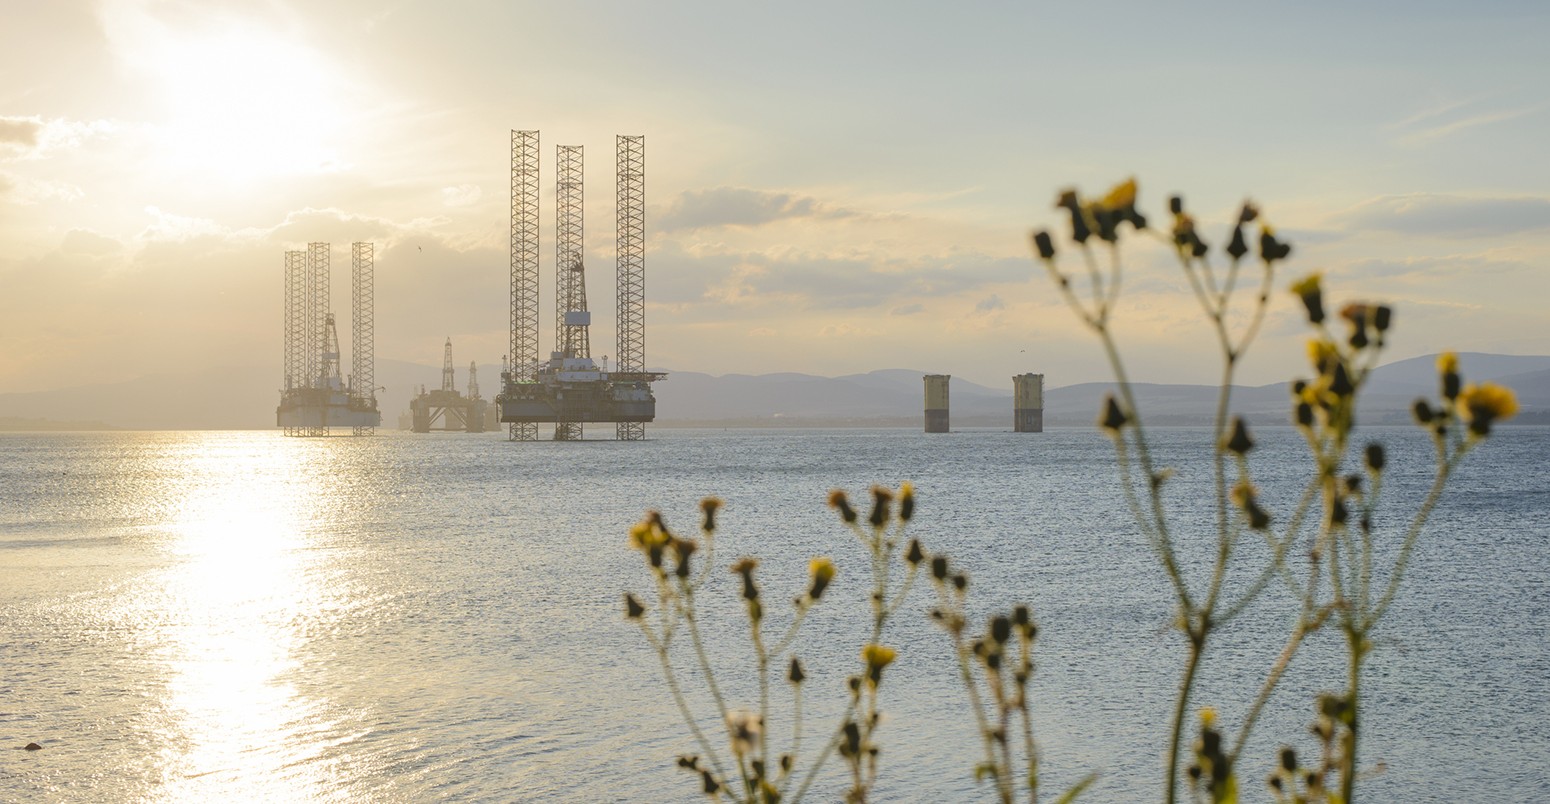 North Sea oil platforms, shot from the shore, moored in Cromarty Firth, Scotland. Defocused wild flowers in the foreground, growing on the shore